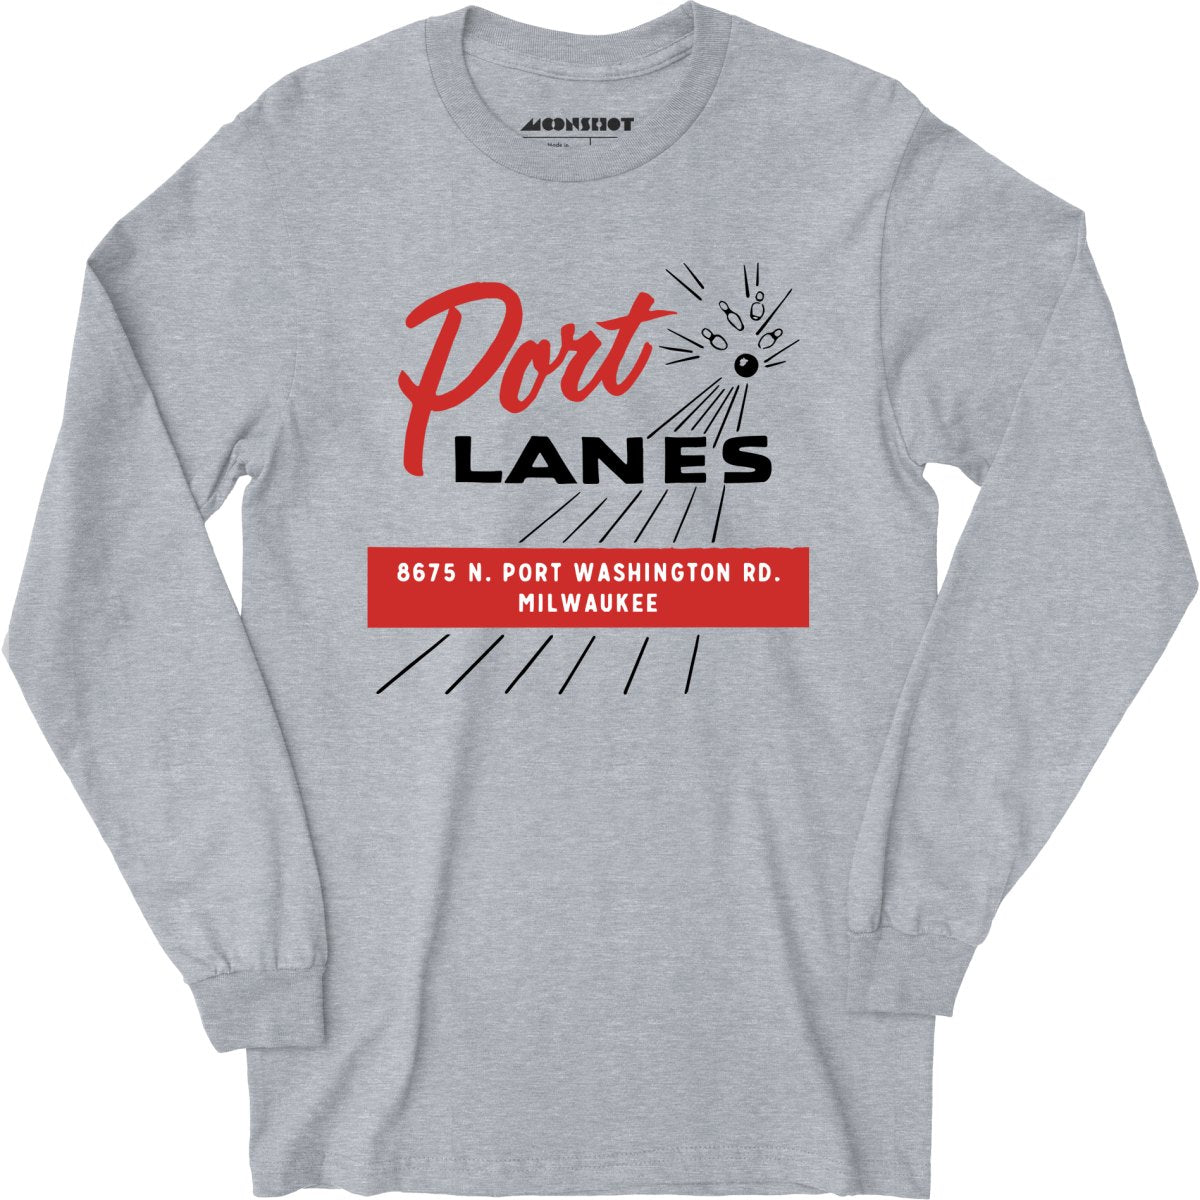 Port Lanes - Milwaukee, WI - Vintage Bowling Alley - Long Sleeve T-Shirt